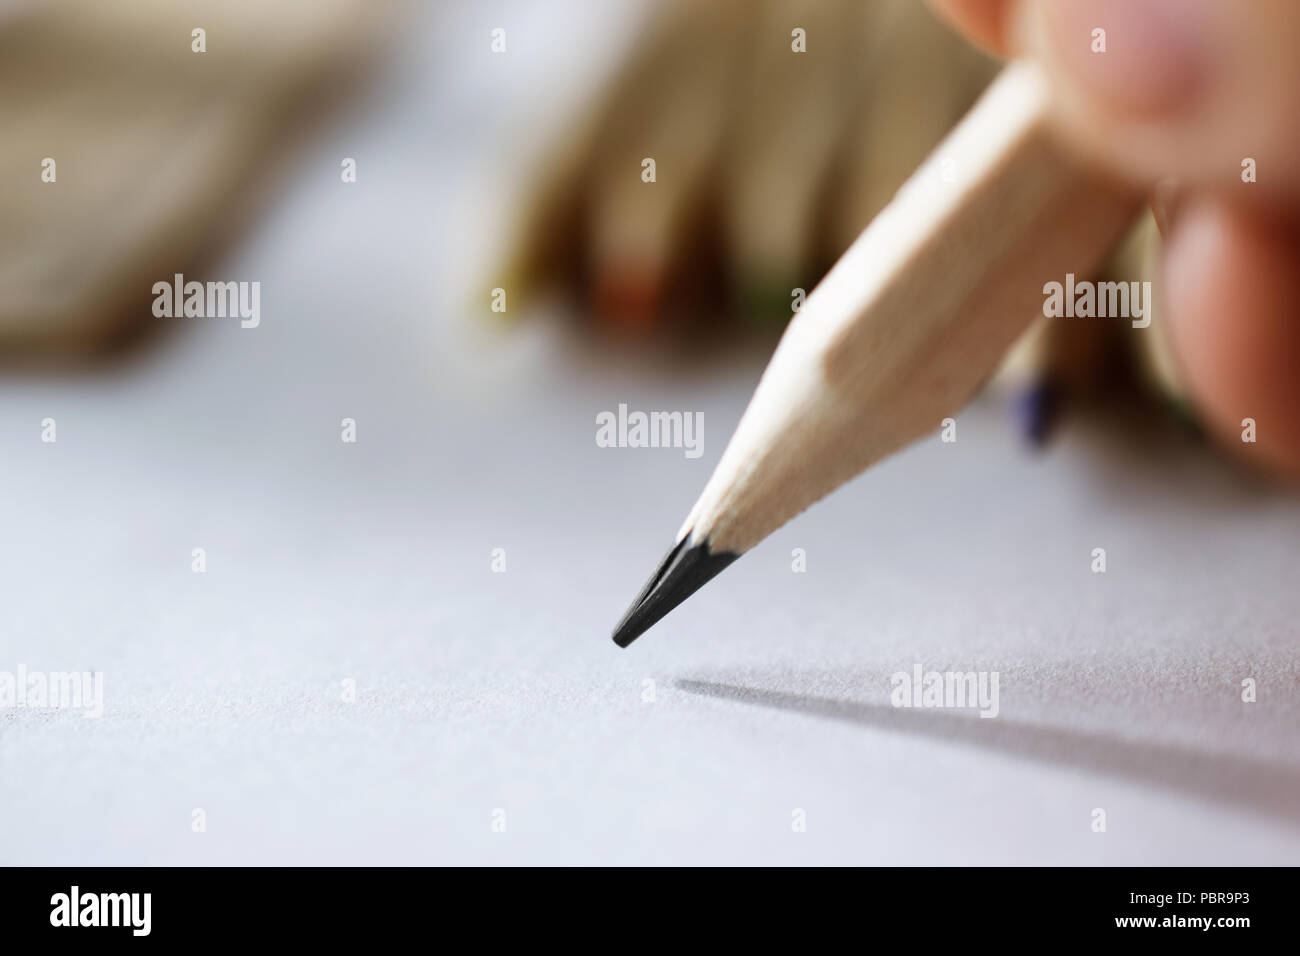 artist's hand sketching with a simple pencil, close-up Stock Photo